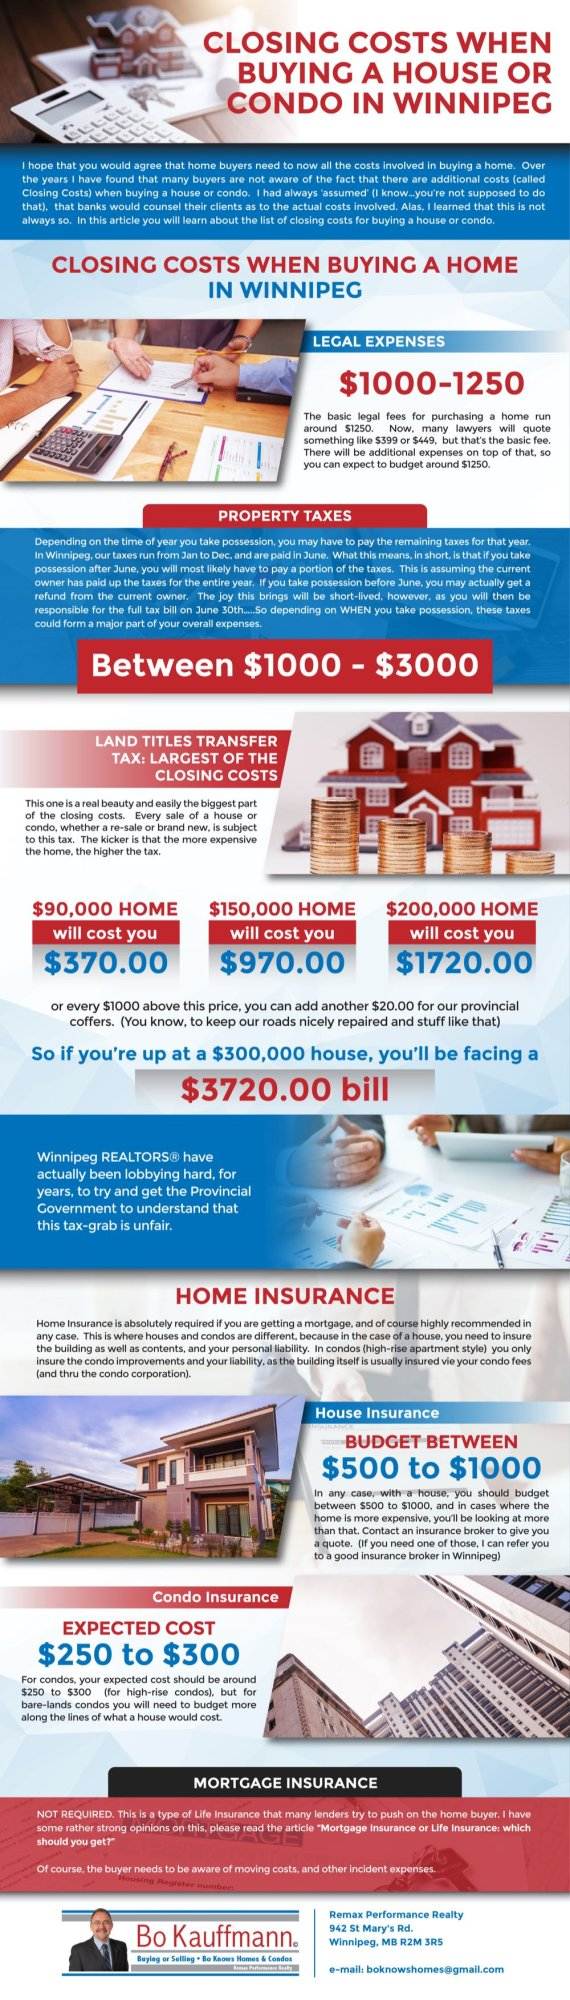 Closing Cost when buying a house in Winnipeg (infographic)